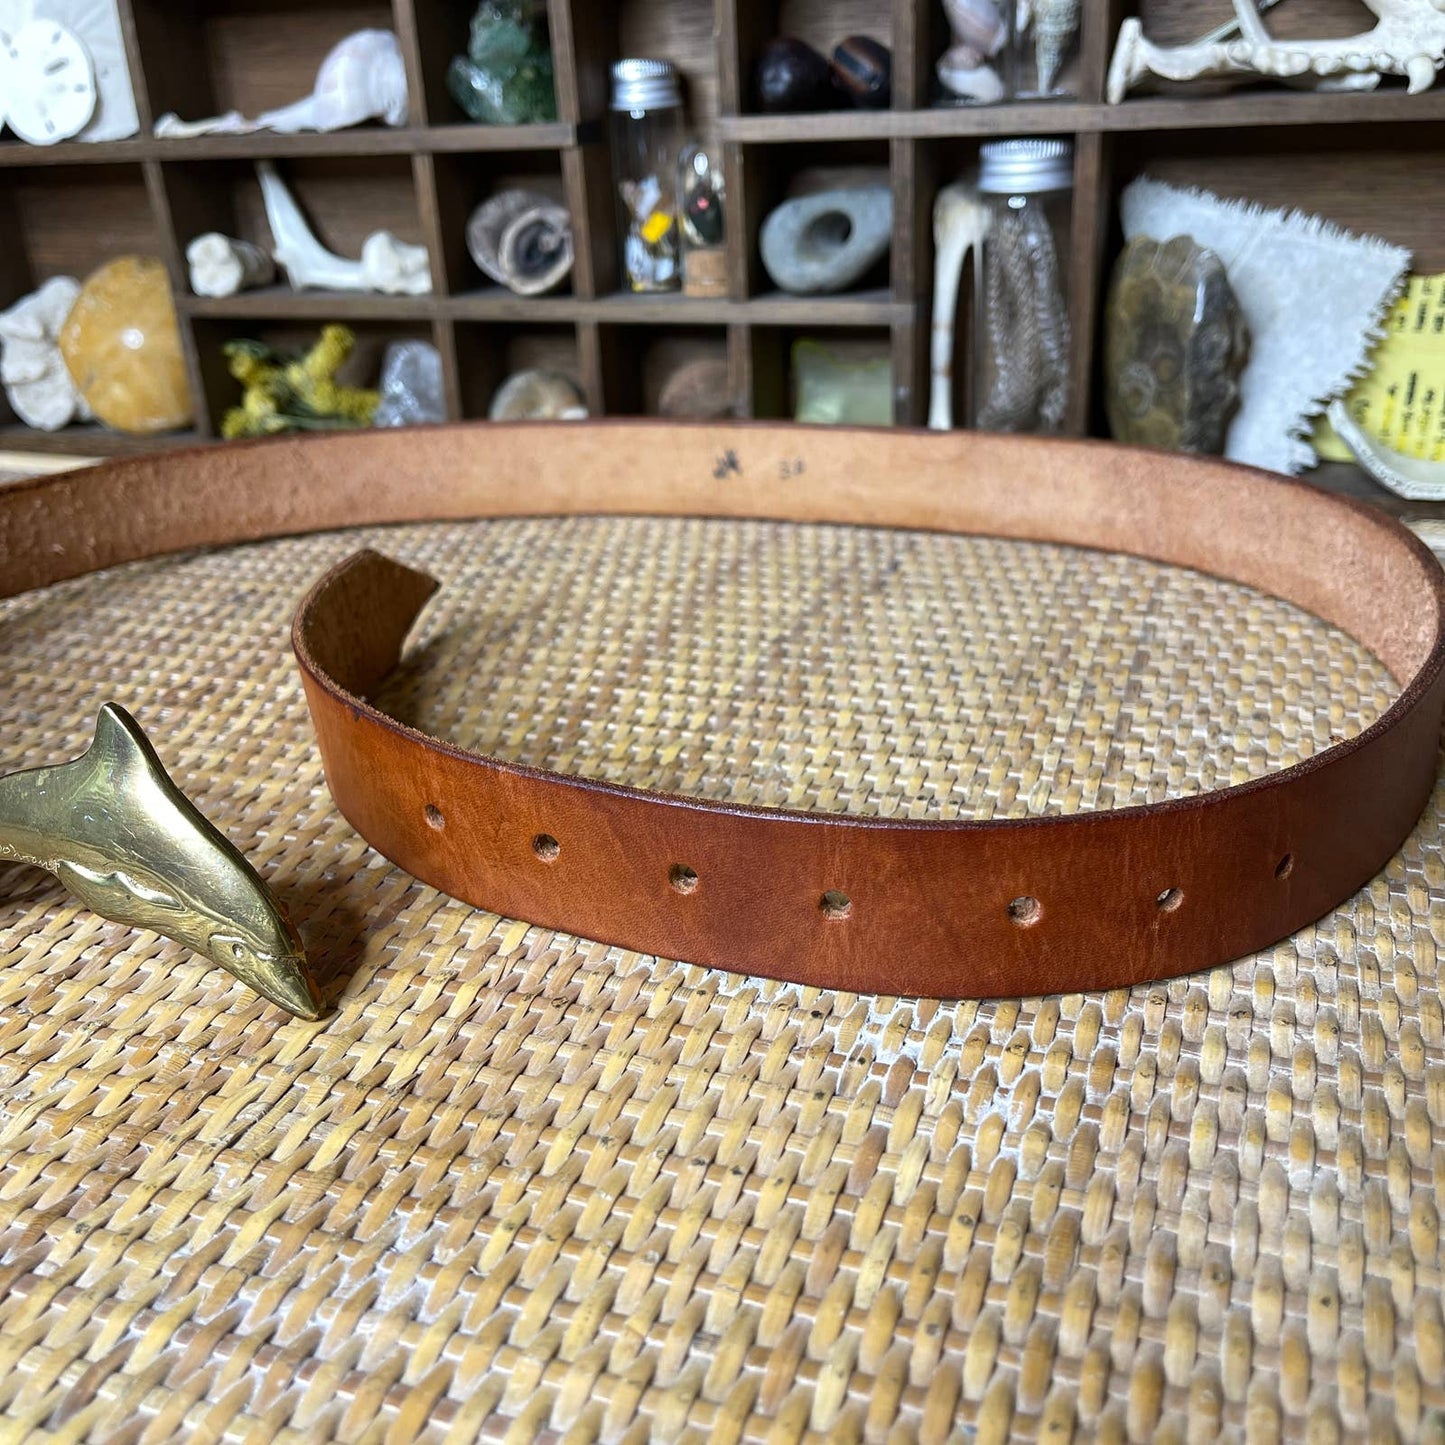 Vintage 90s Brown Leather Belt with Brass Dolphin Buckle Artisan Made